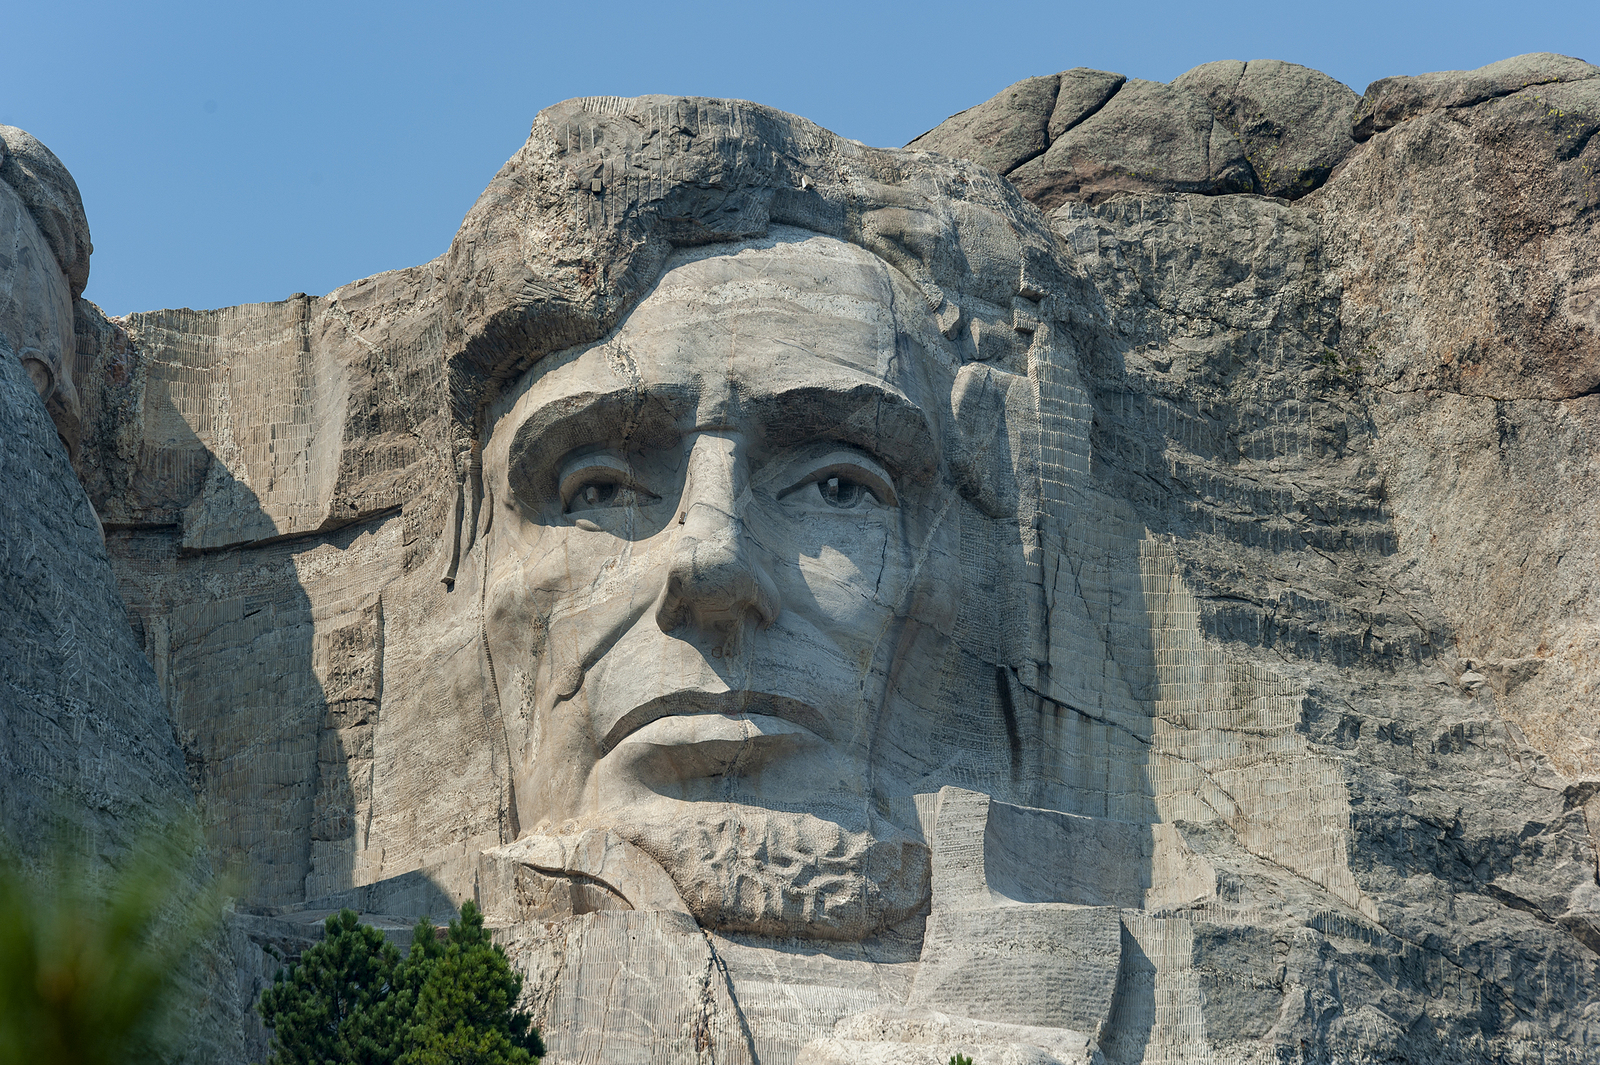 Abraham Lincoln: An Art Tribute to the 16th President of the US